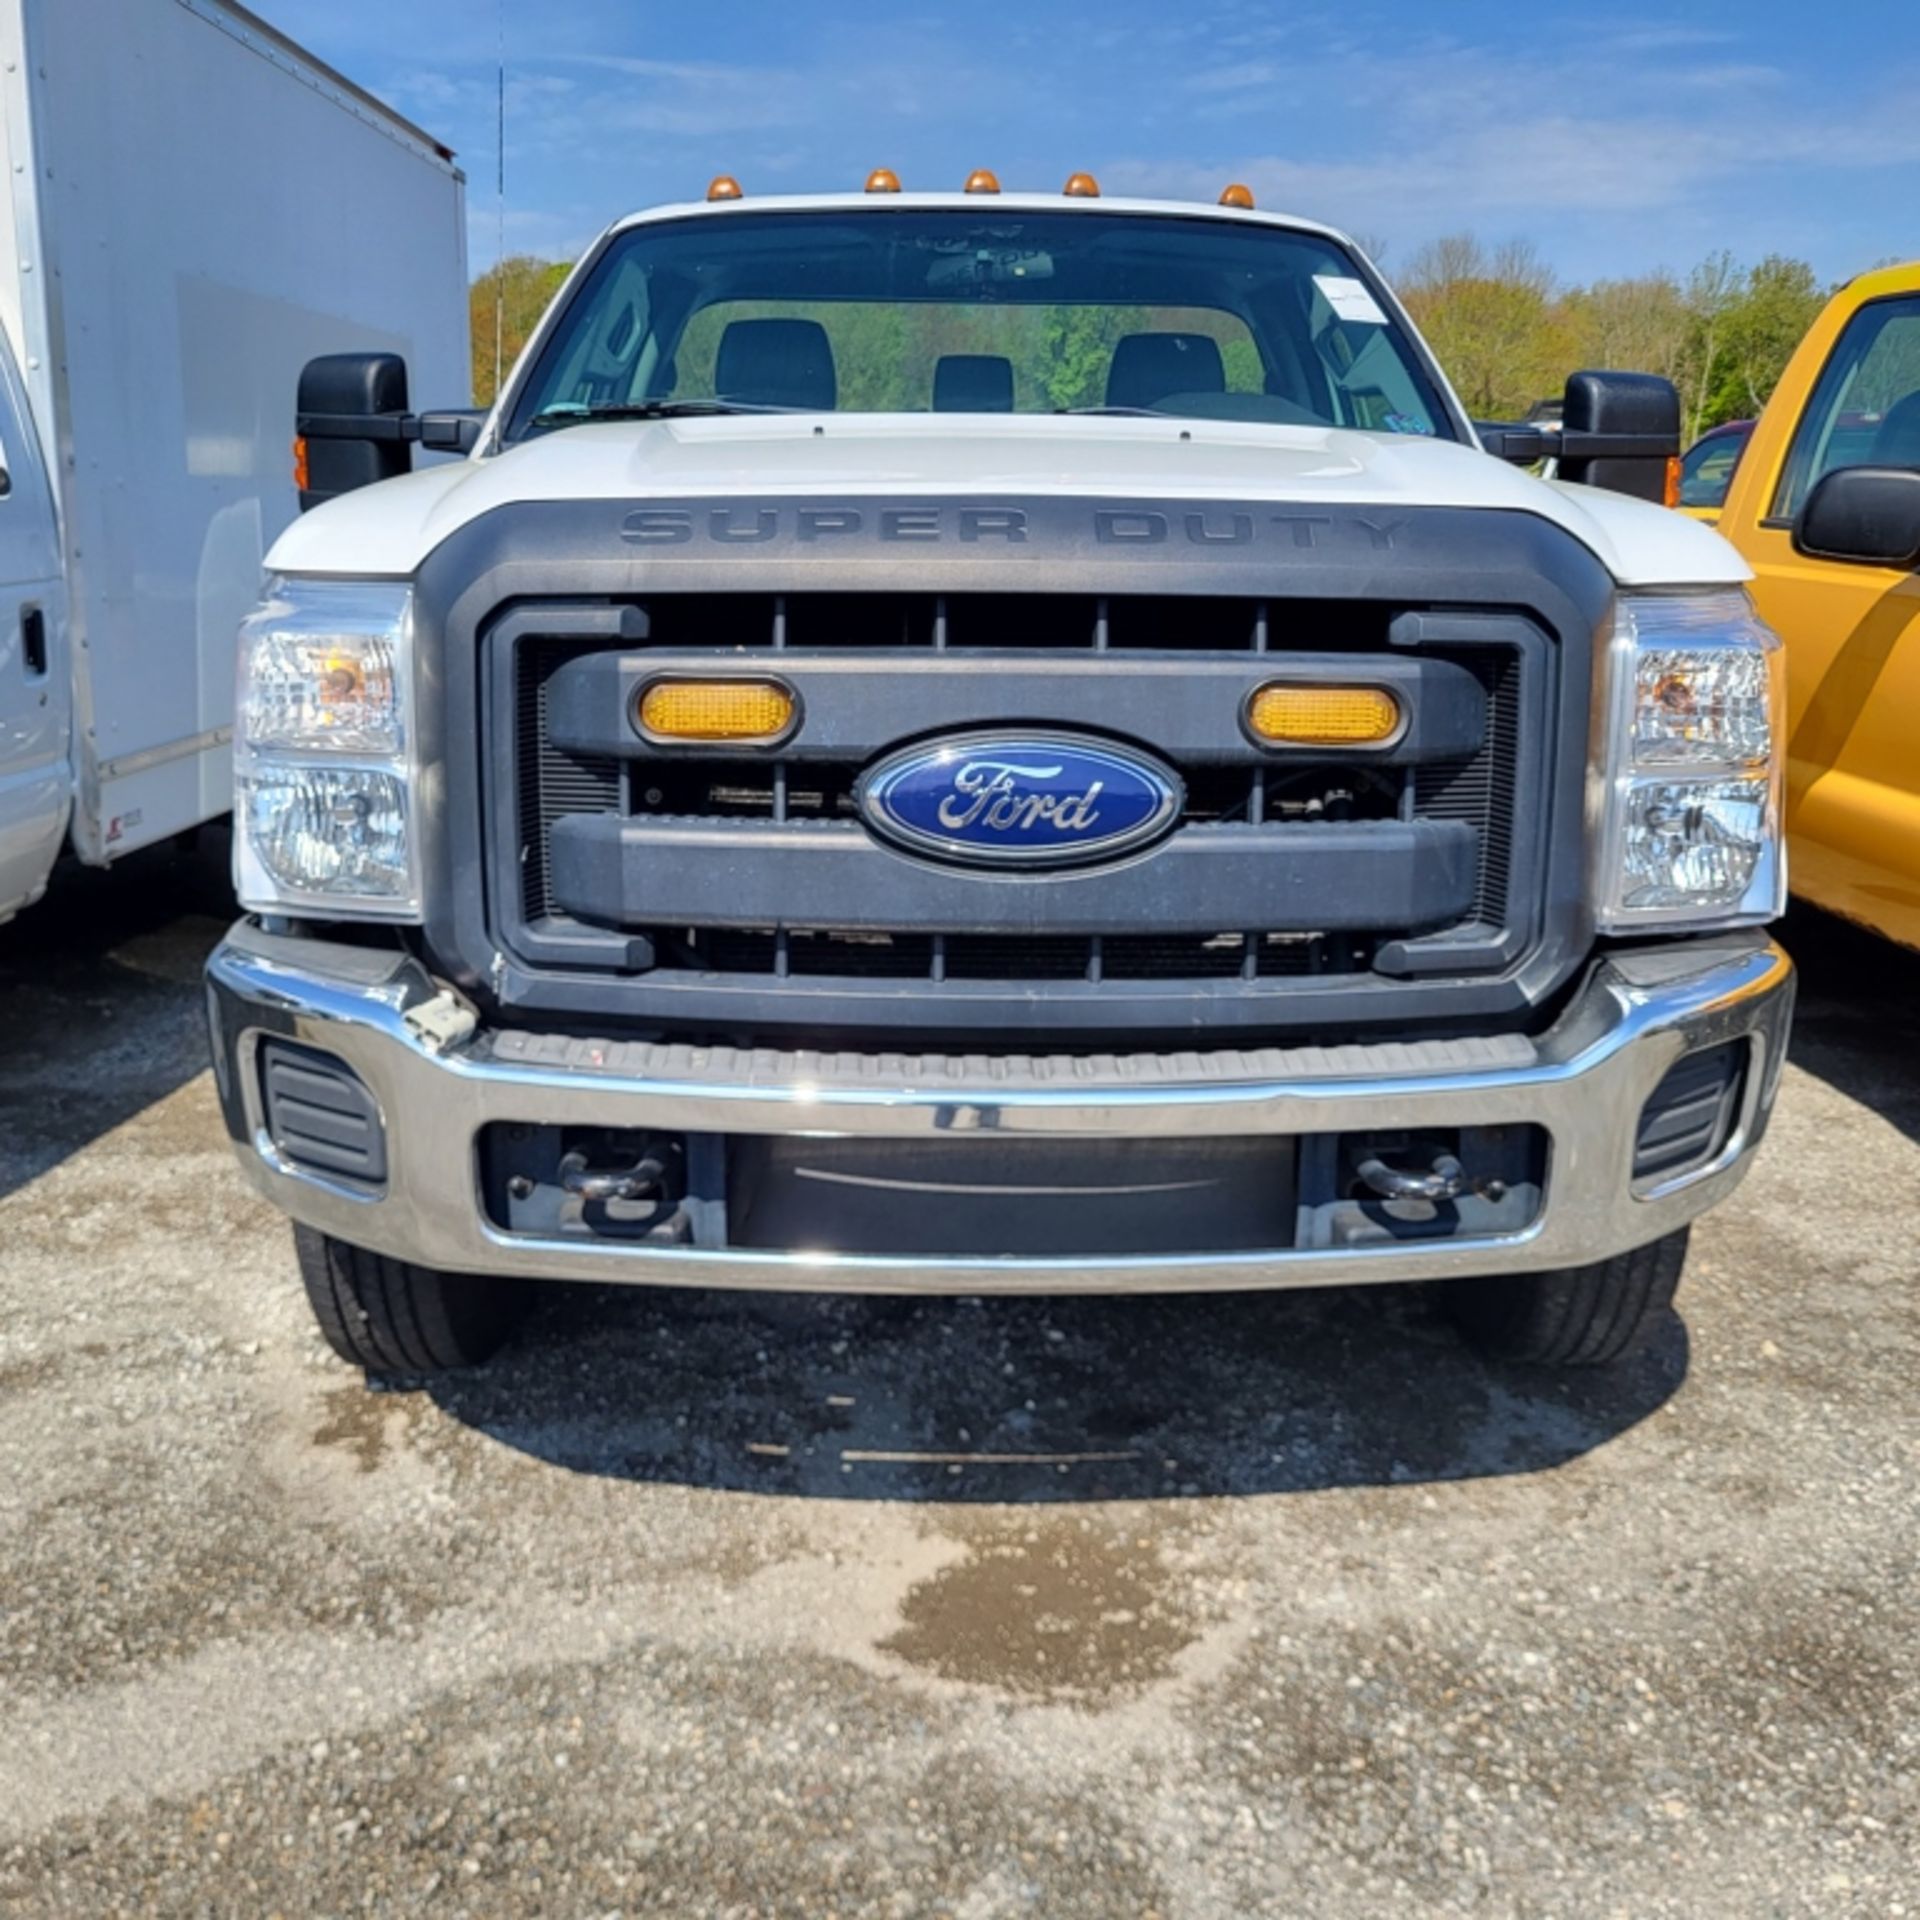 2013 Ford F-350 Pickup - Image 3 of 17